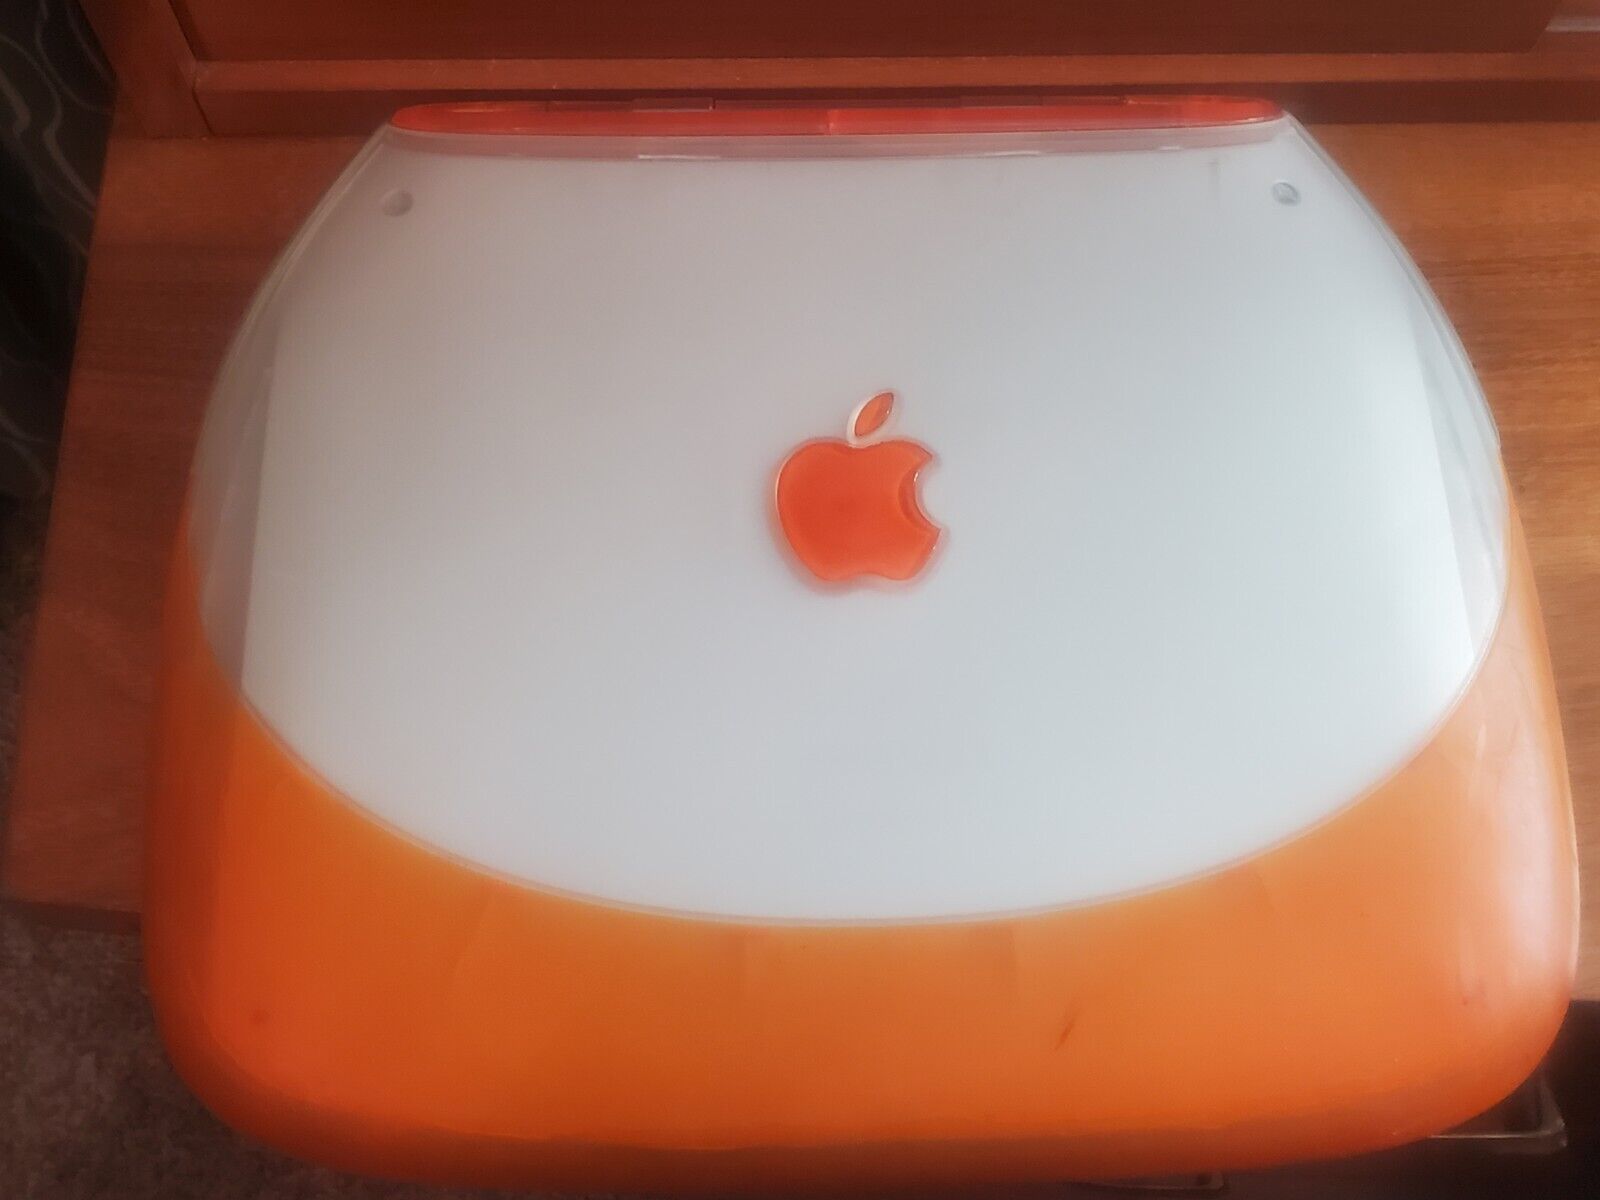 Vintage Apple Tangerine Clamshell iBook G3 My Family M2453 Untested